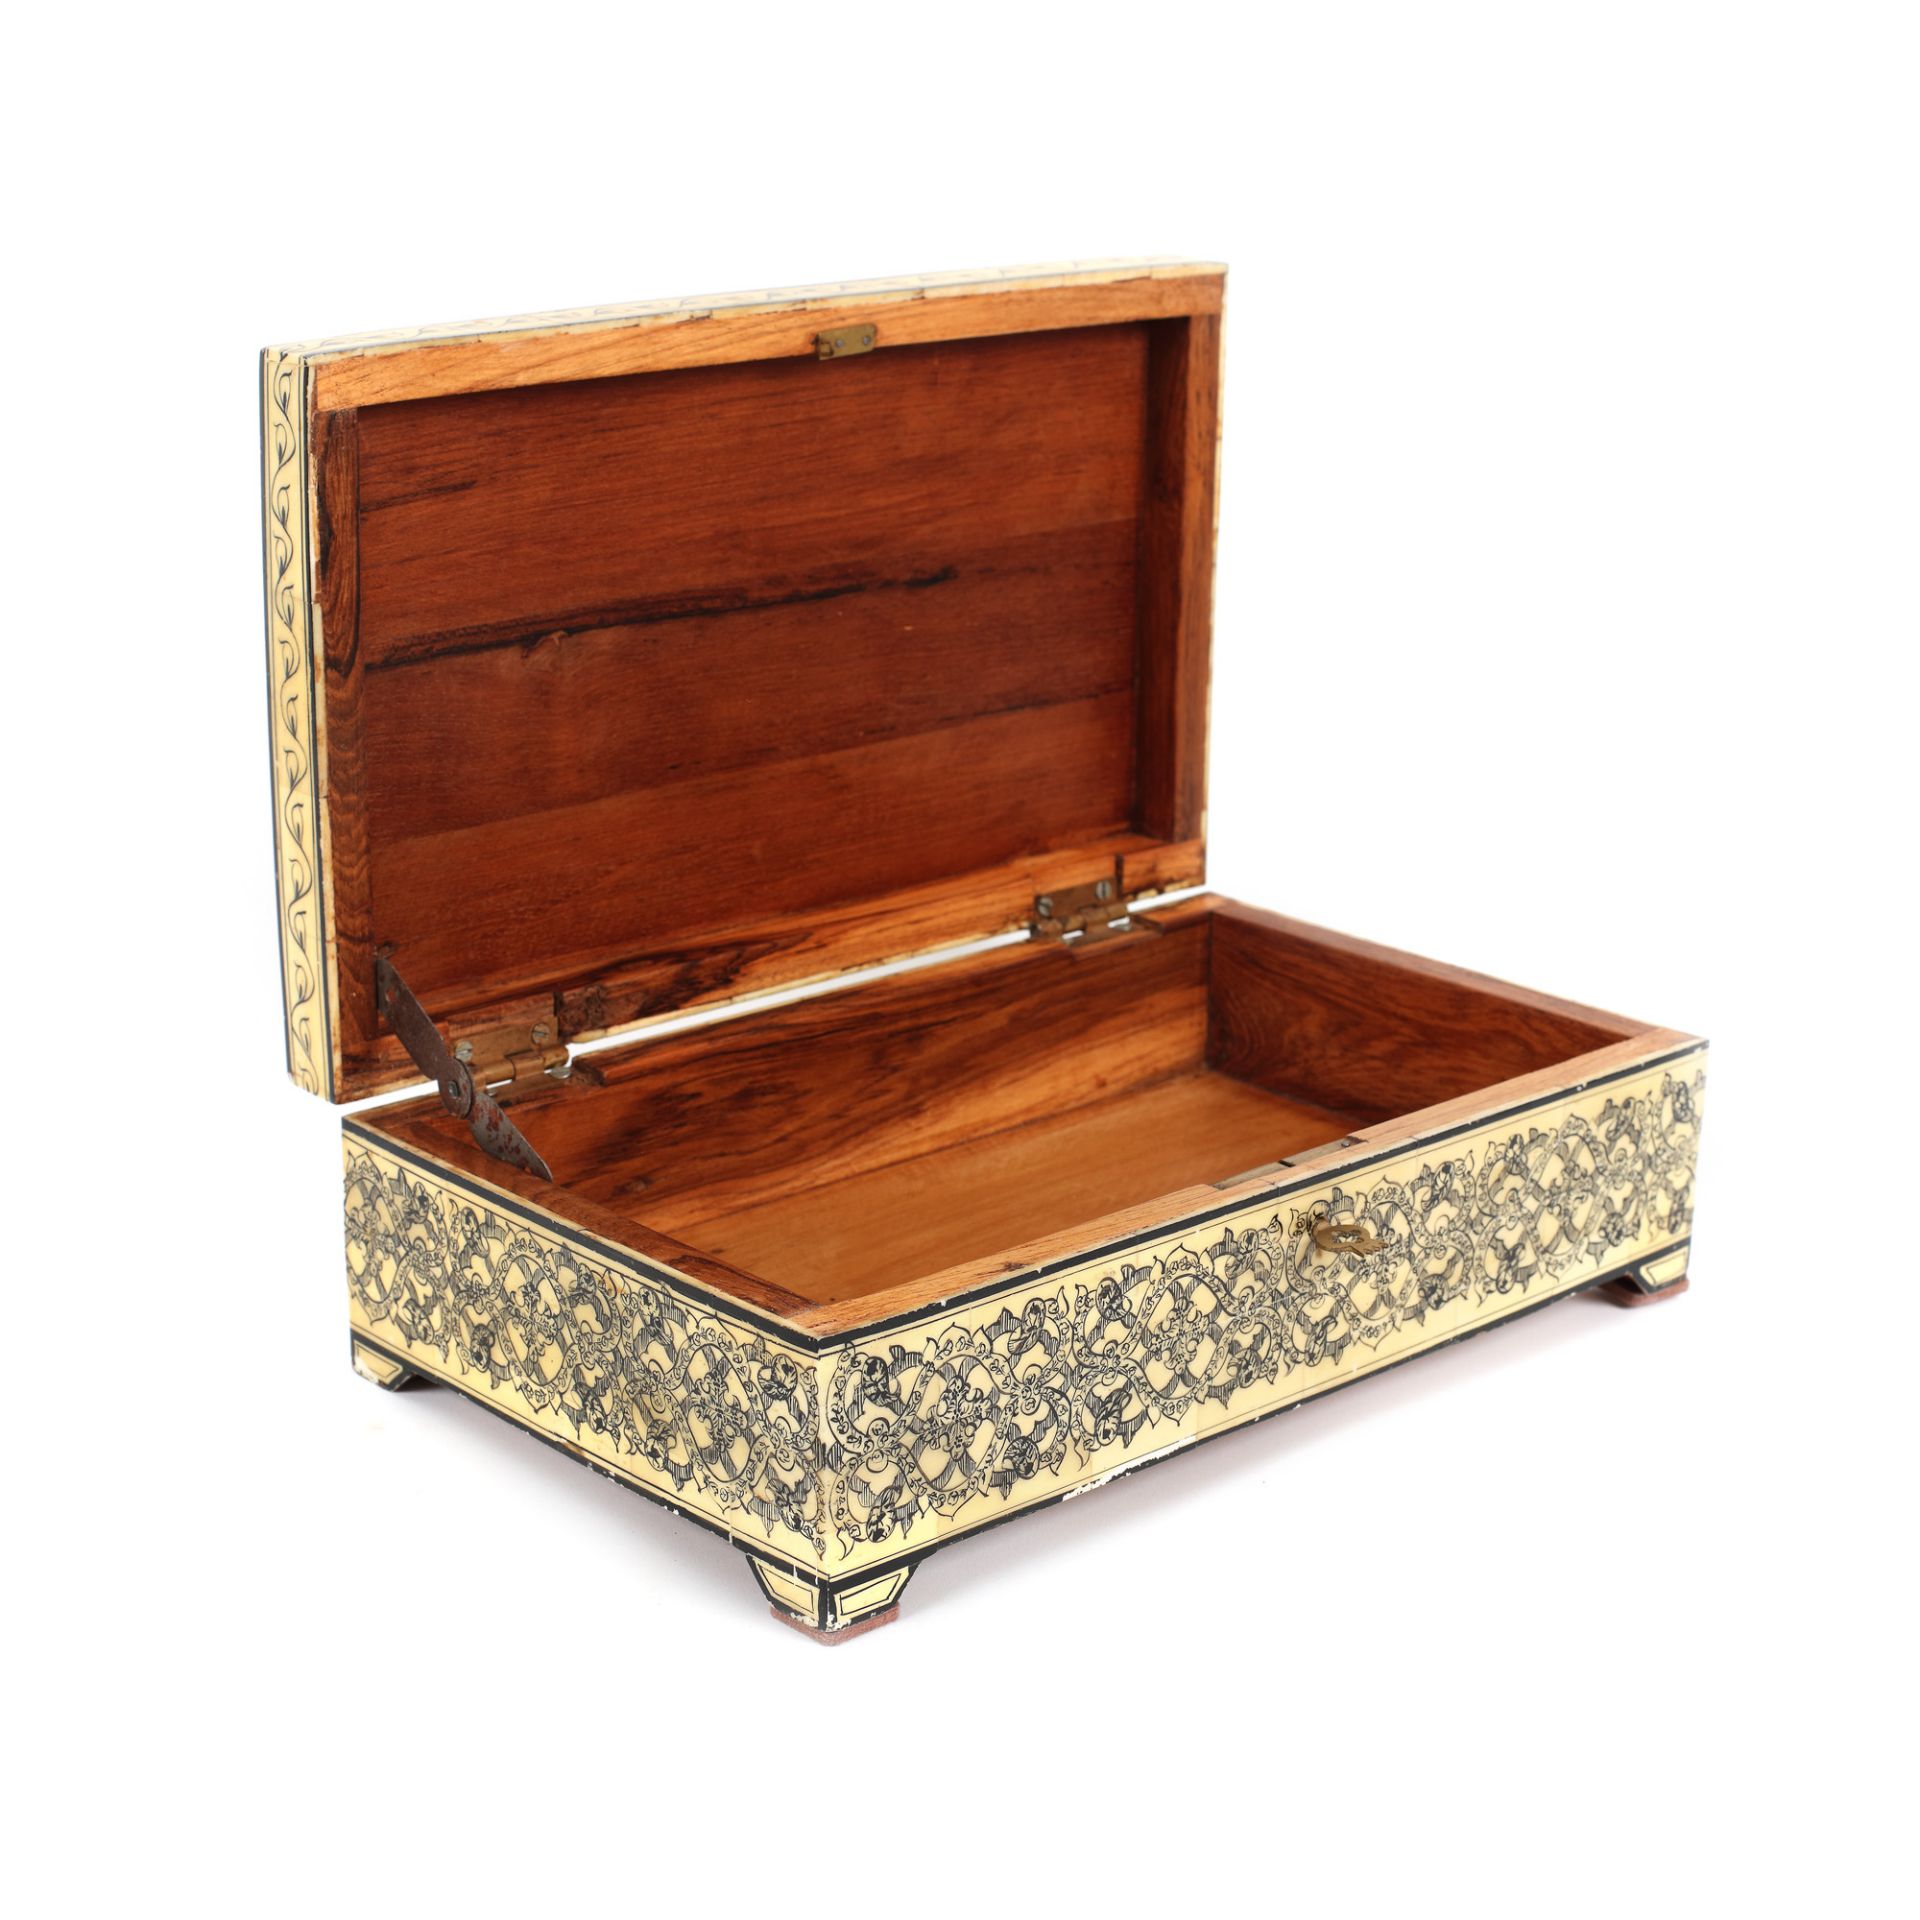 Wooden box with bone inlaying, decorated with floral motifs, possibly India - Image 3 of 4